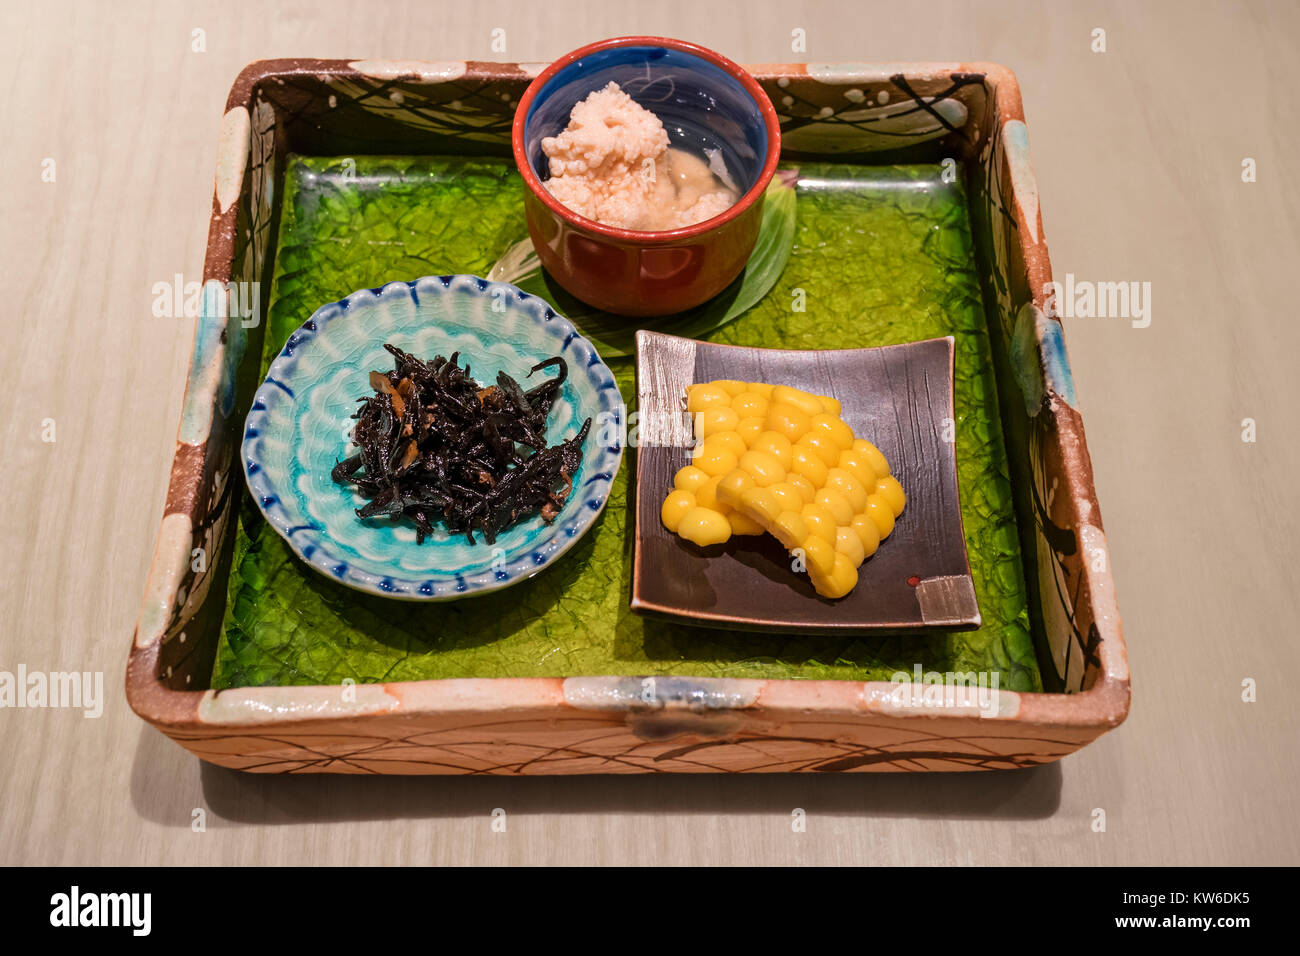 Tokyo - Japan, June 18, 2017; Traditional delicate served dish with corn, seaweed and fish eggs Stock Photo